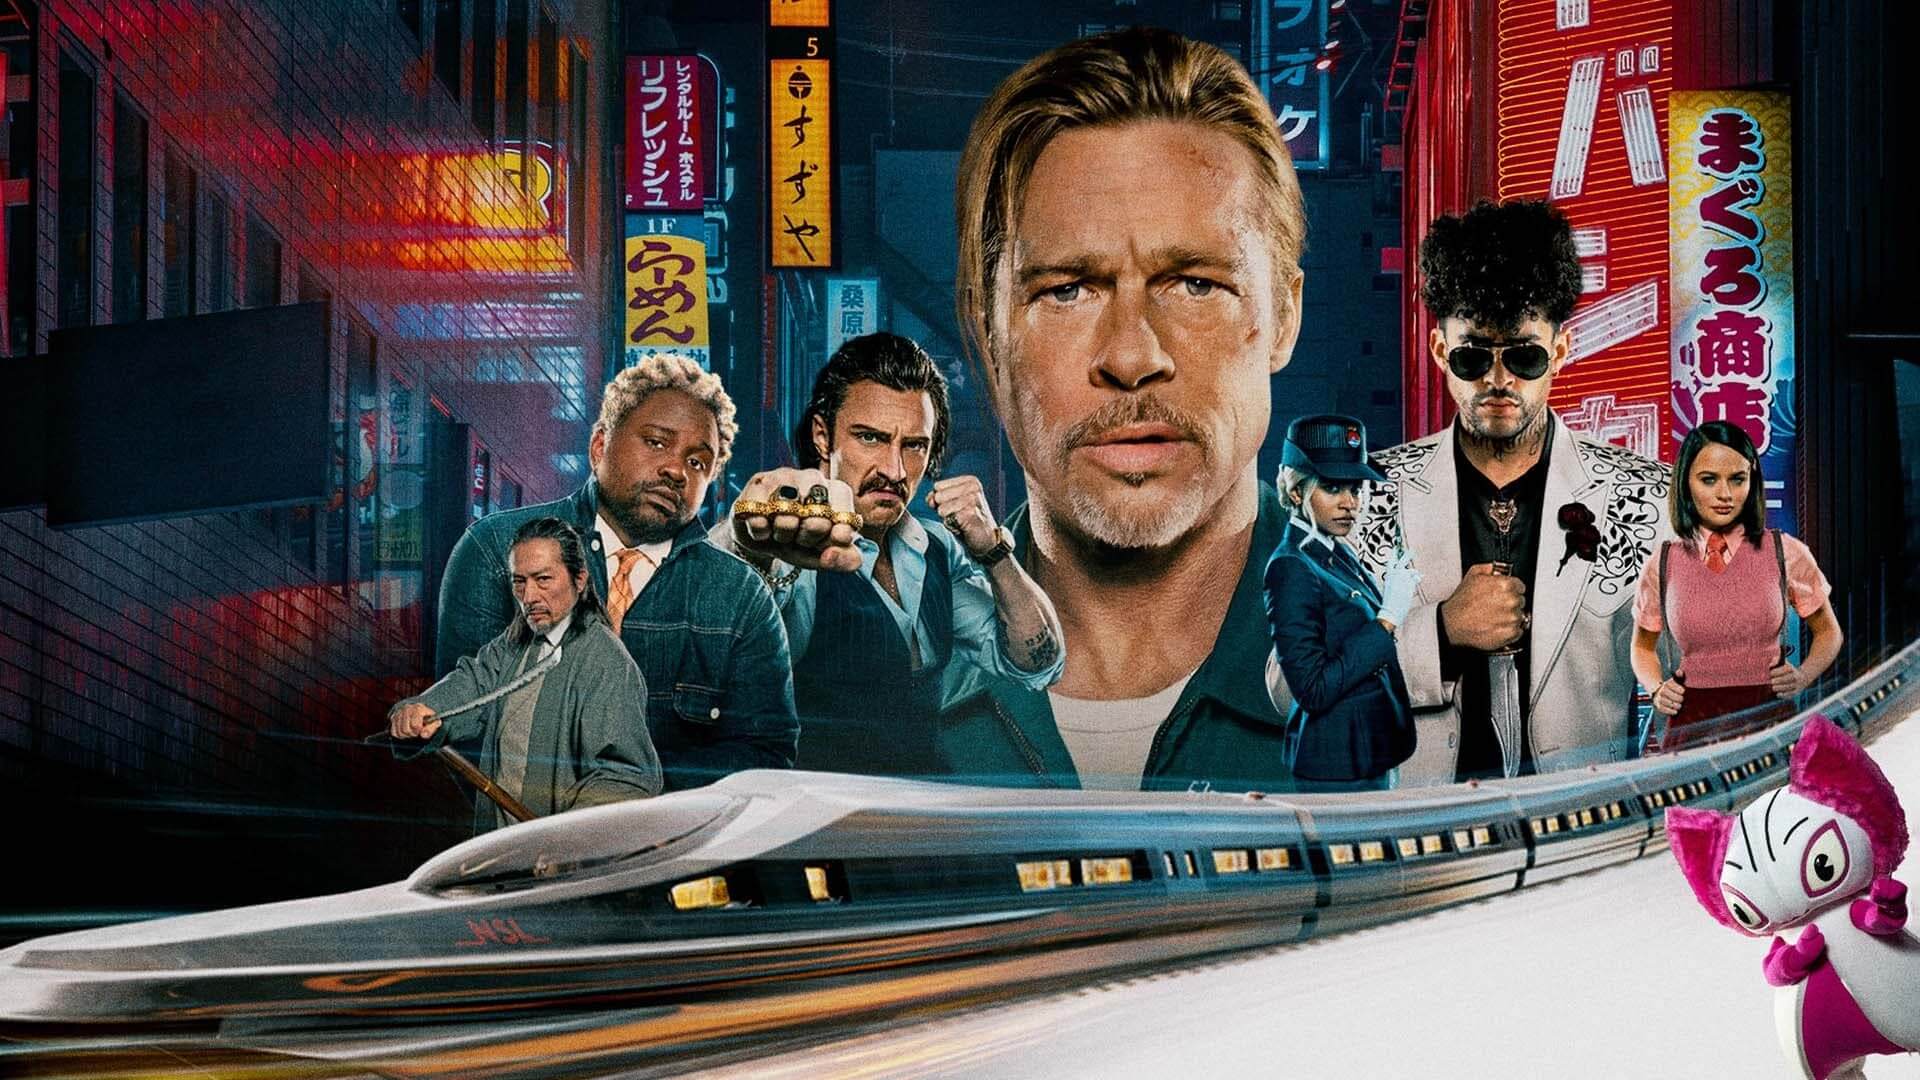 ‘Bullet Train’ Sets Netflix to Launch in December 2022